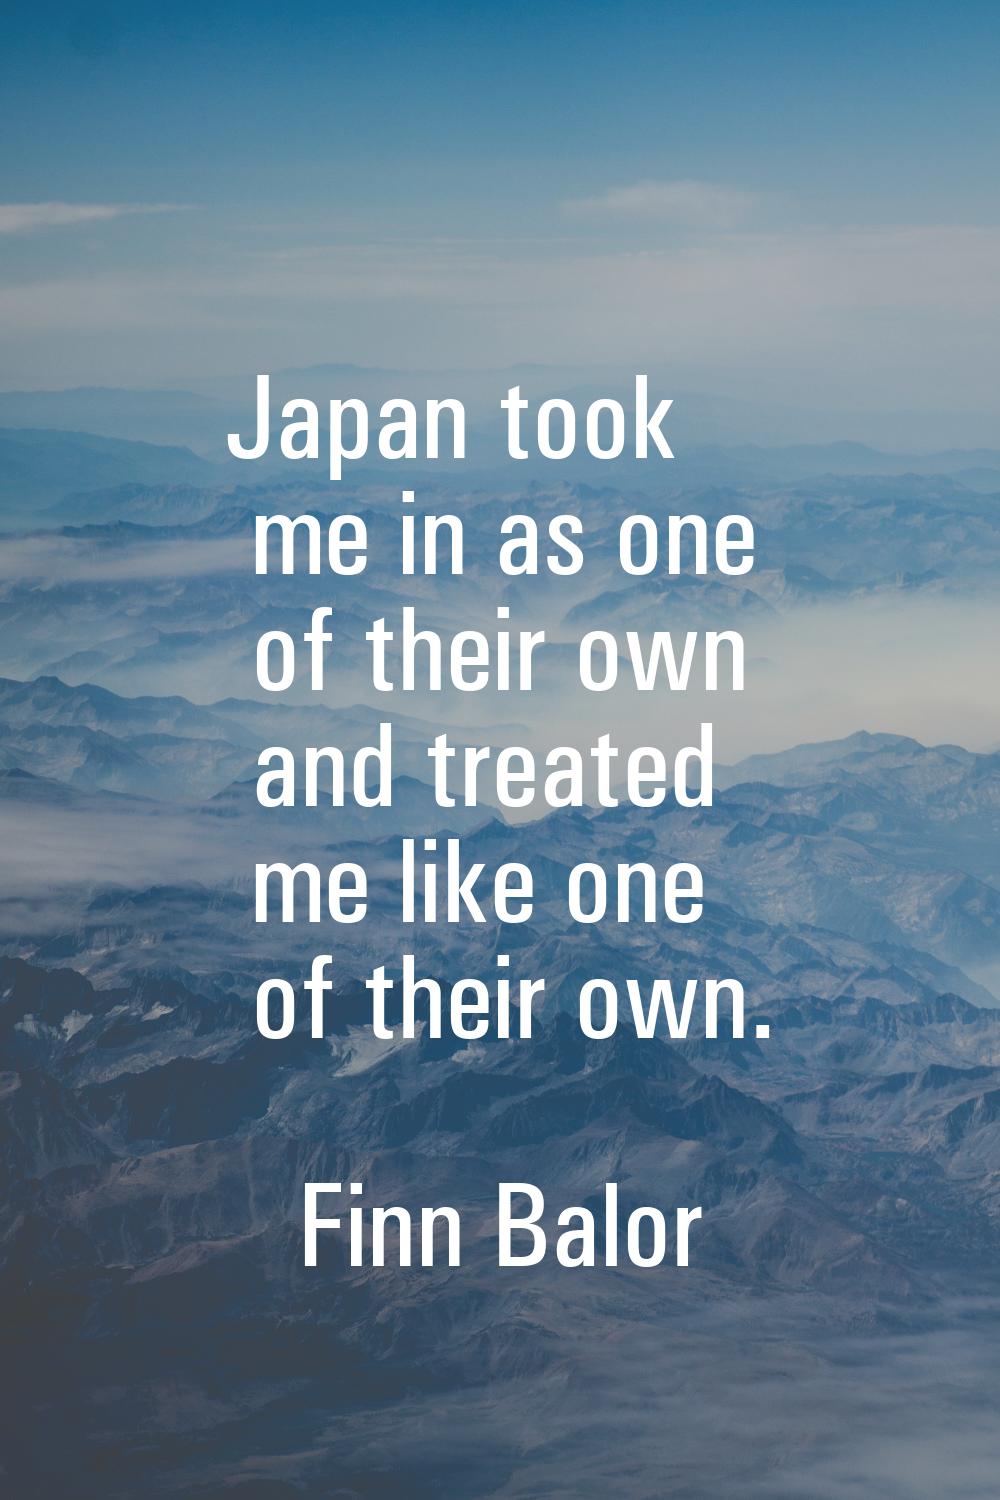 Japan took me in as one of their own and treated me like one of their own.